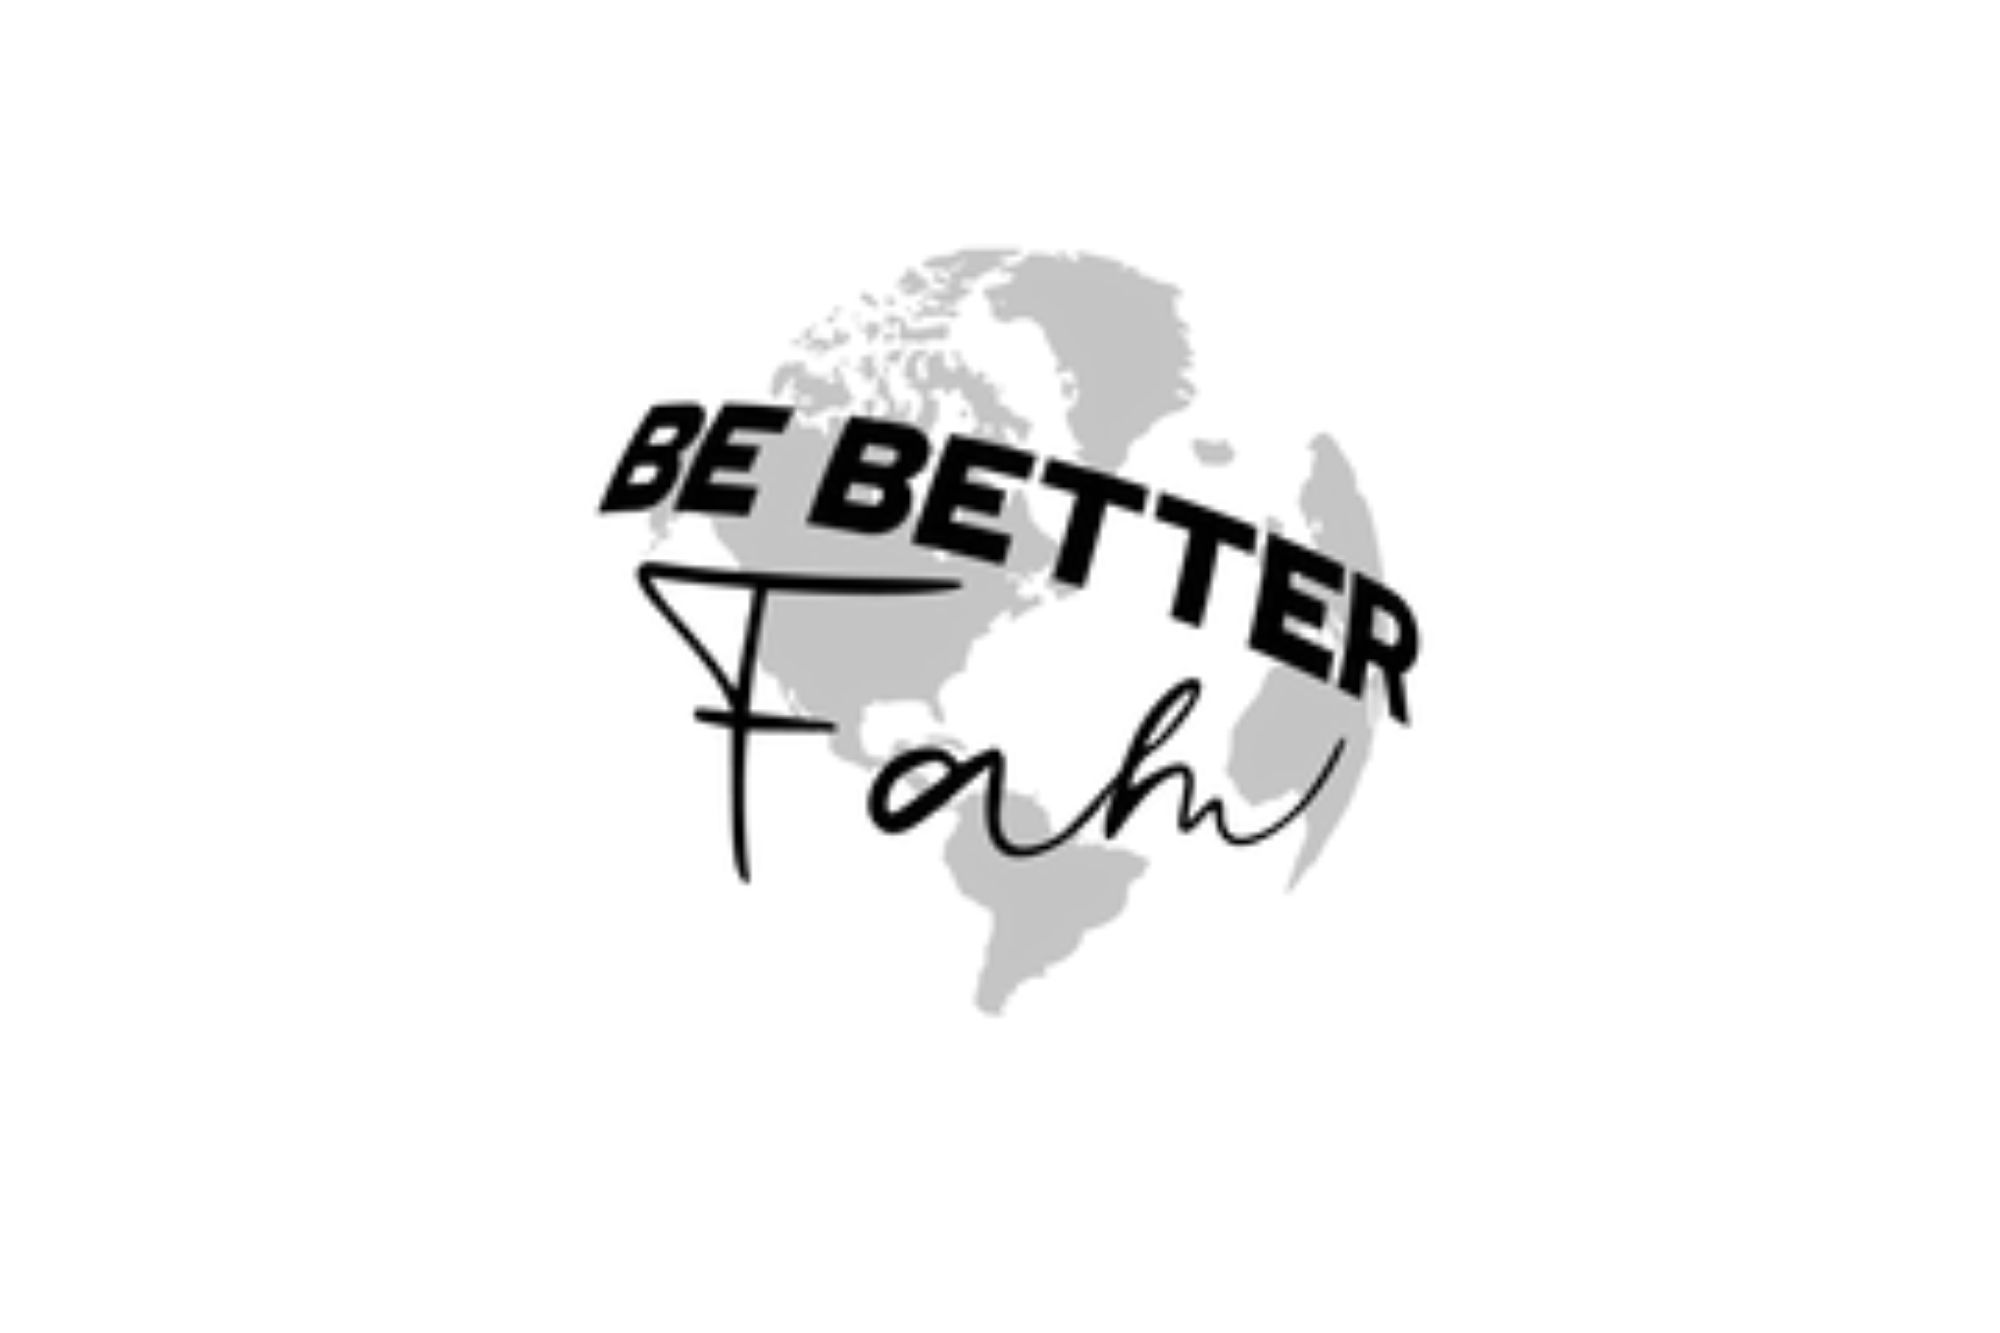 Be Better Fam Clothing and Accessories Logo